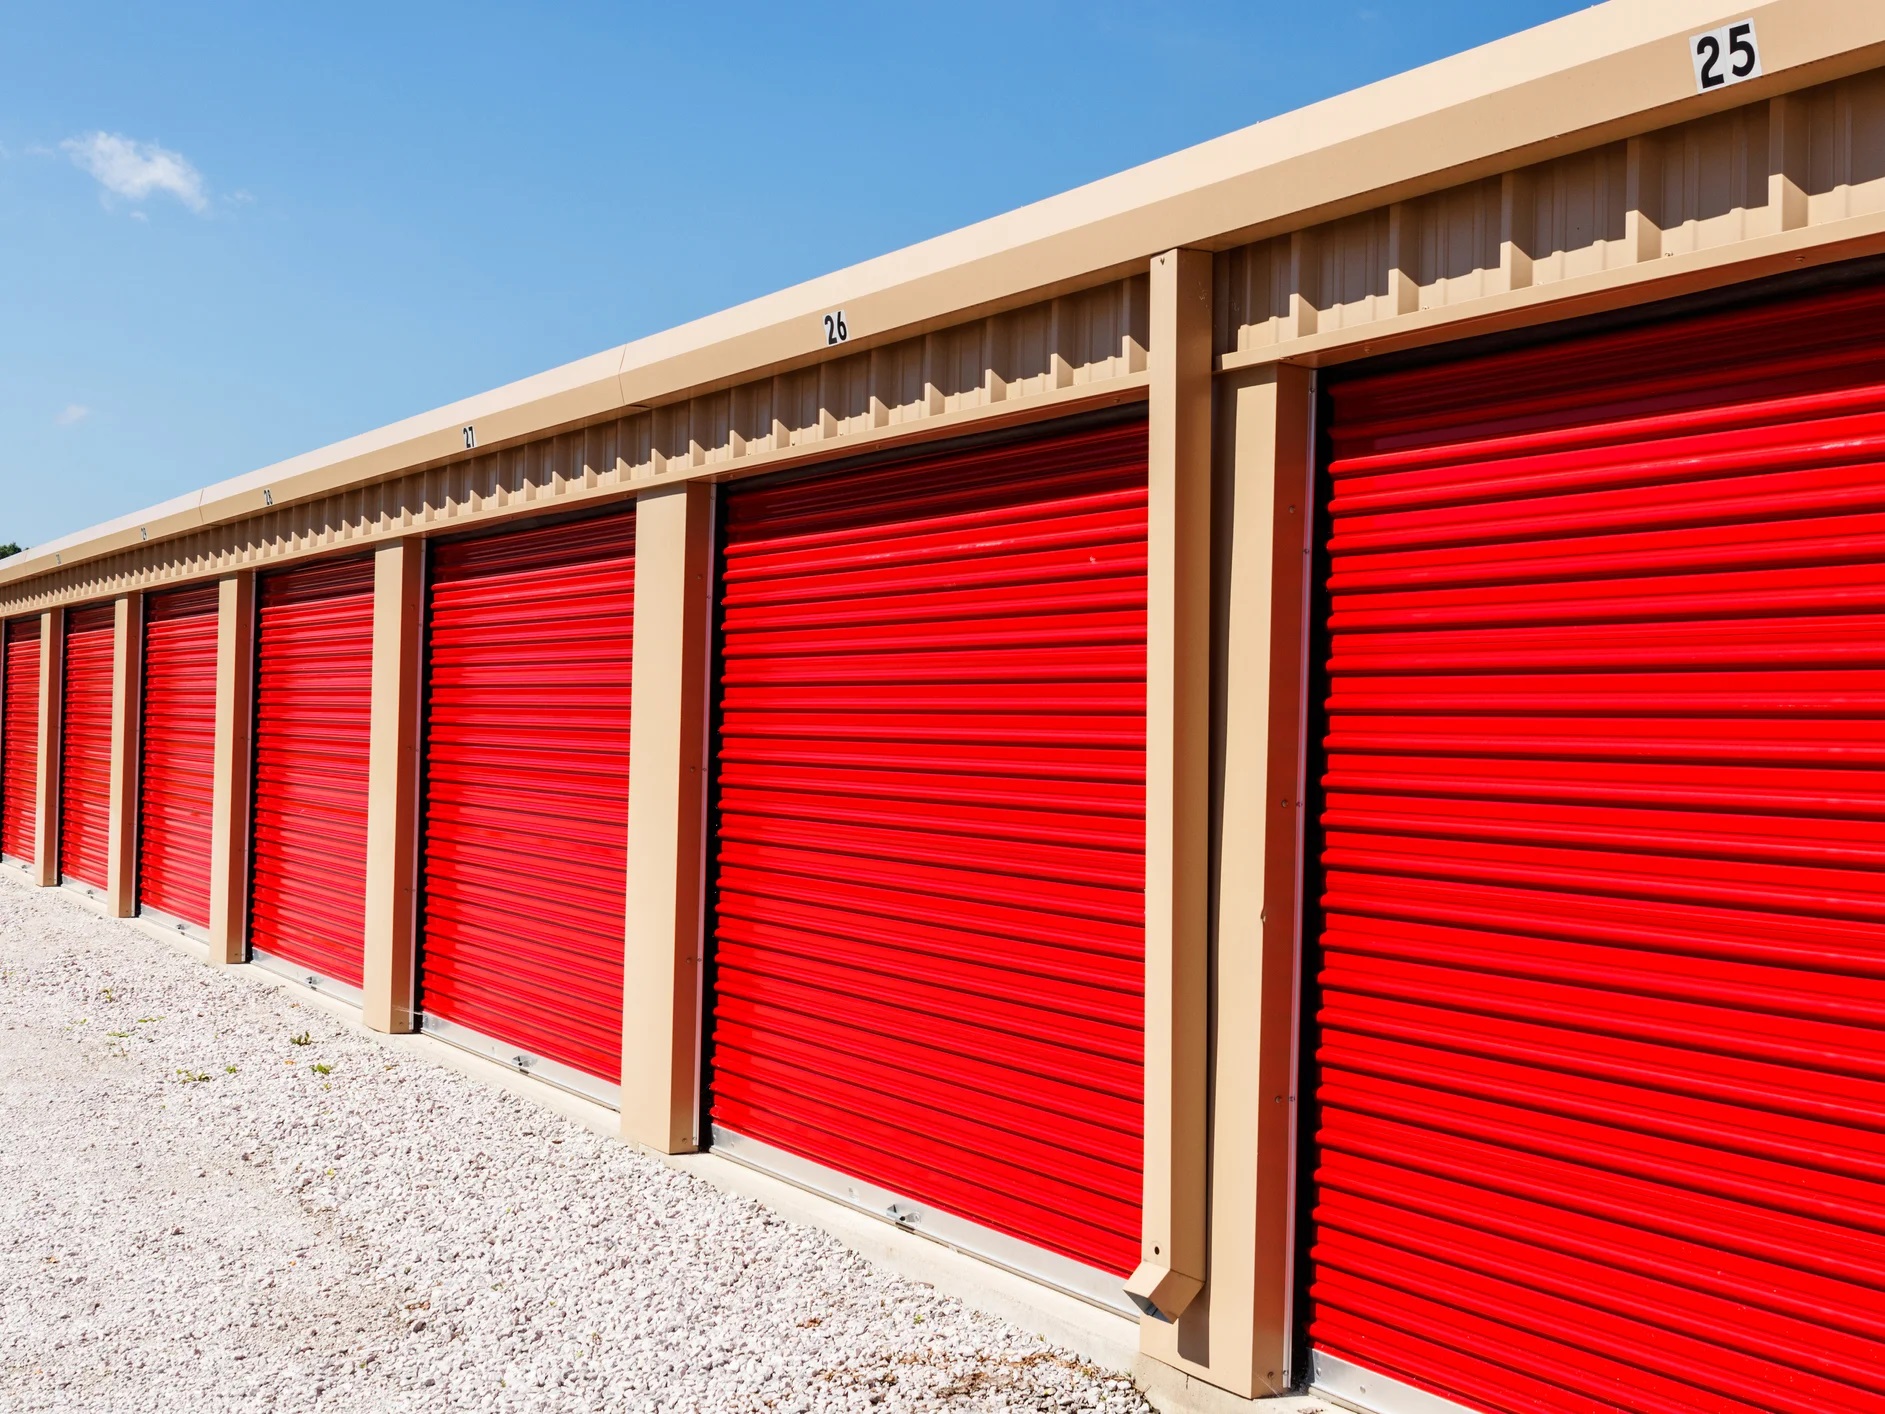 Guide to storage units northern beaches – How to Get the Best of Them